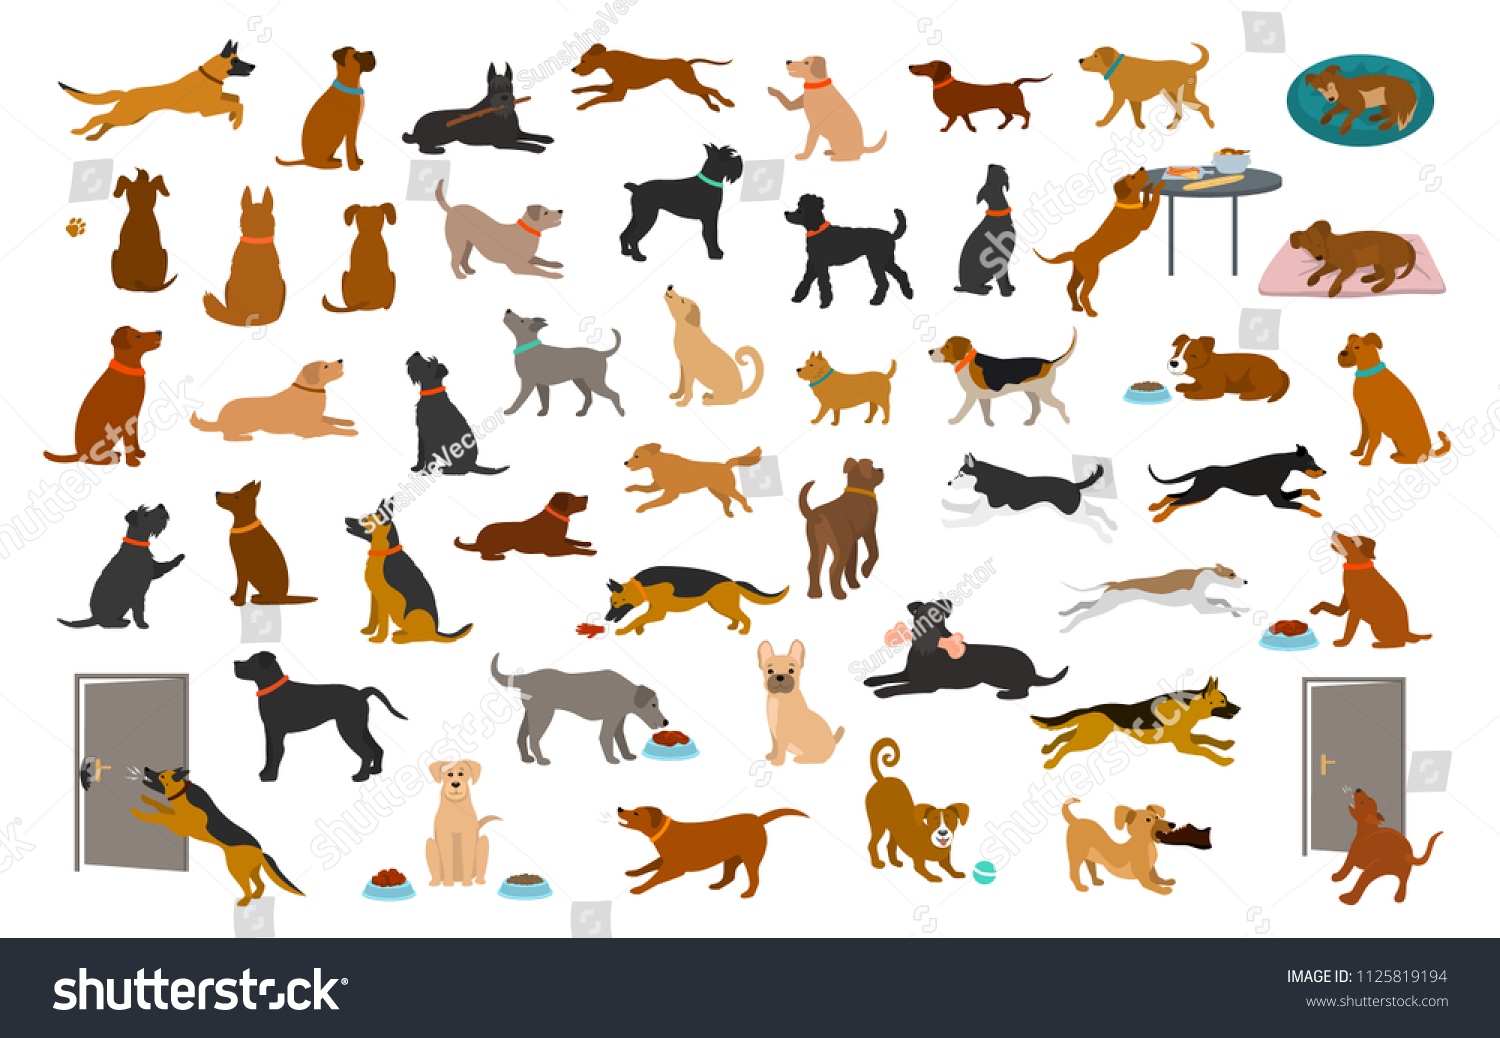 SVG of different dog breeds and mixed set, pets play running jumping eating sleeping, sit lay down and walk, steal food, bark, protect. isolated  cartoon vector illustration graphic svg